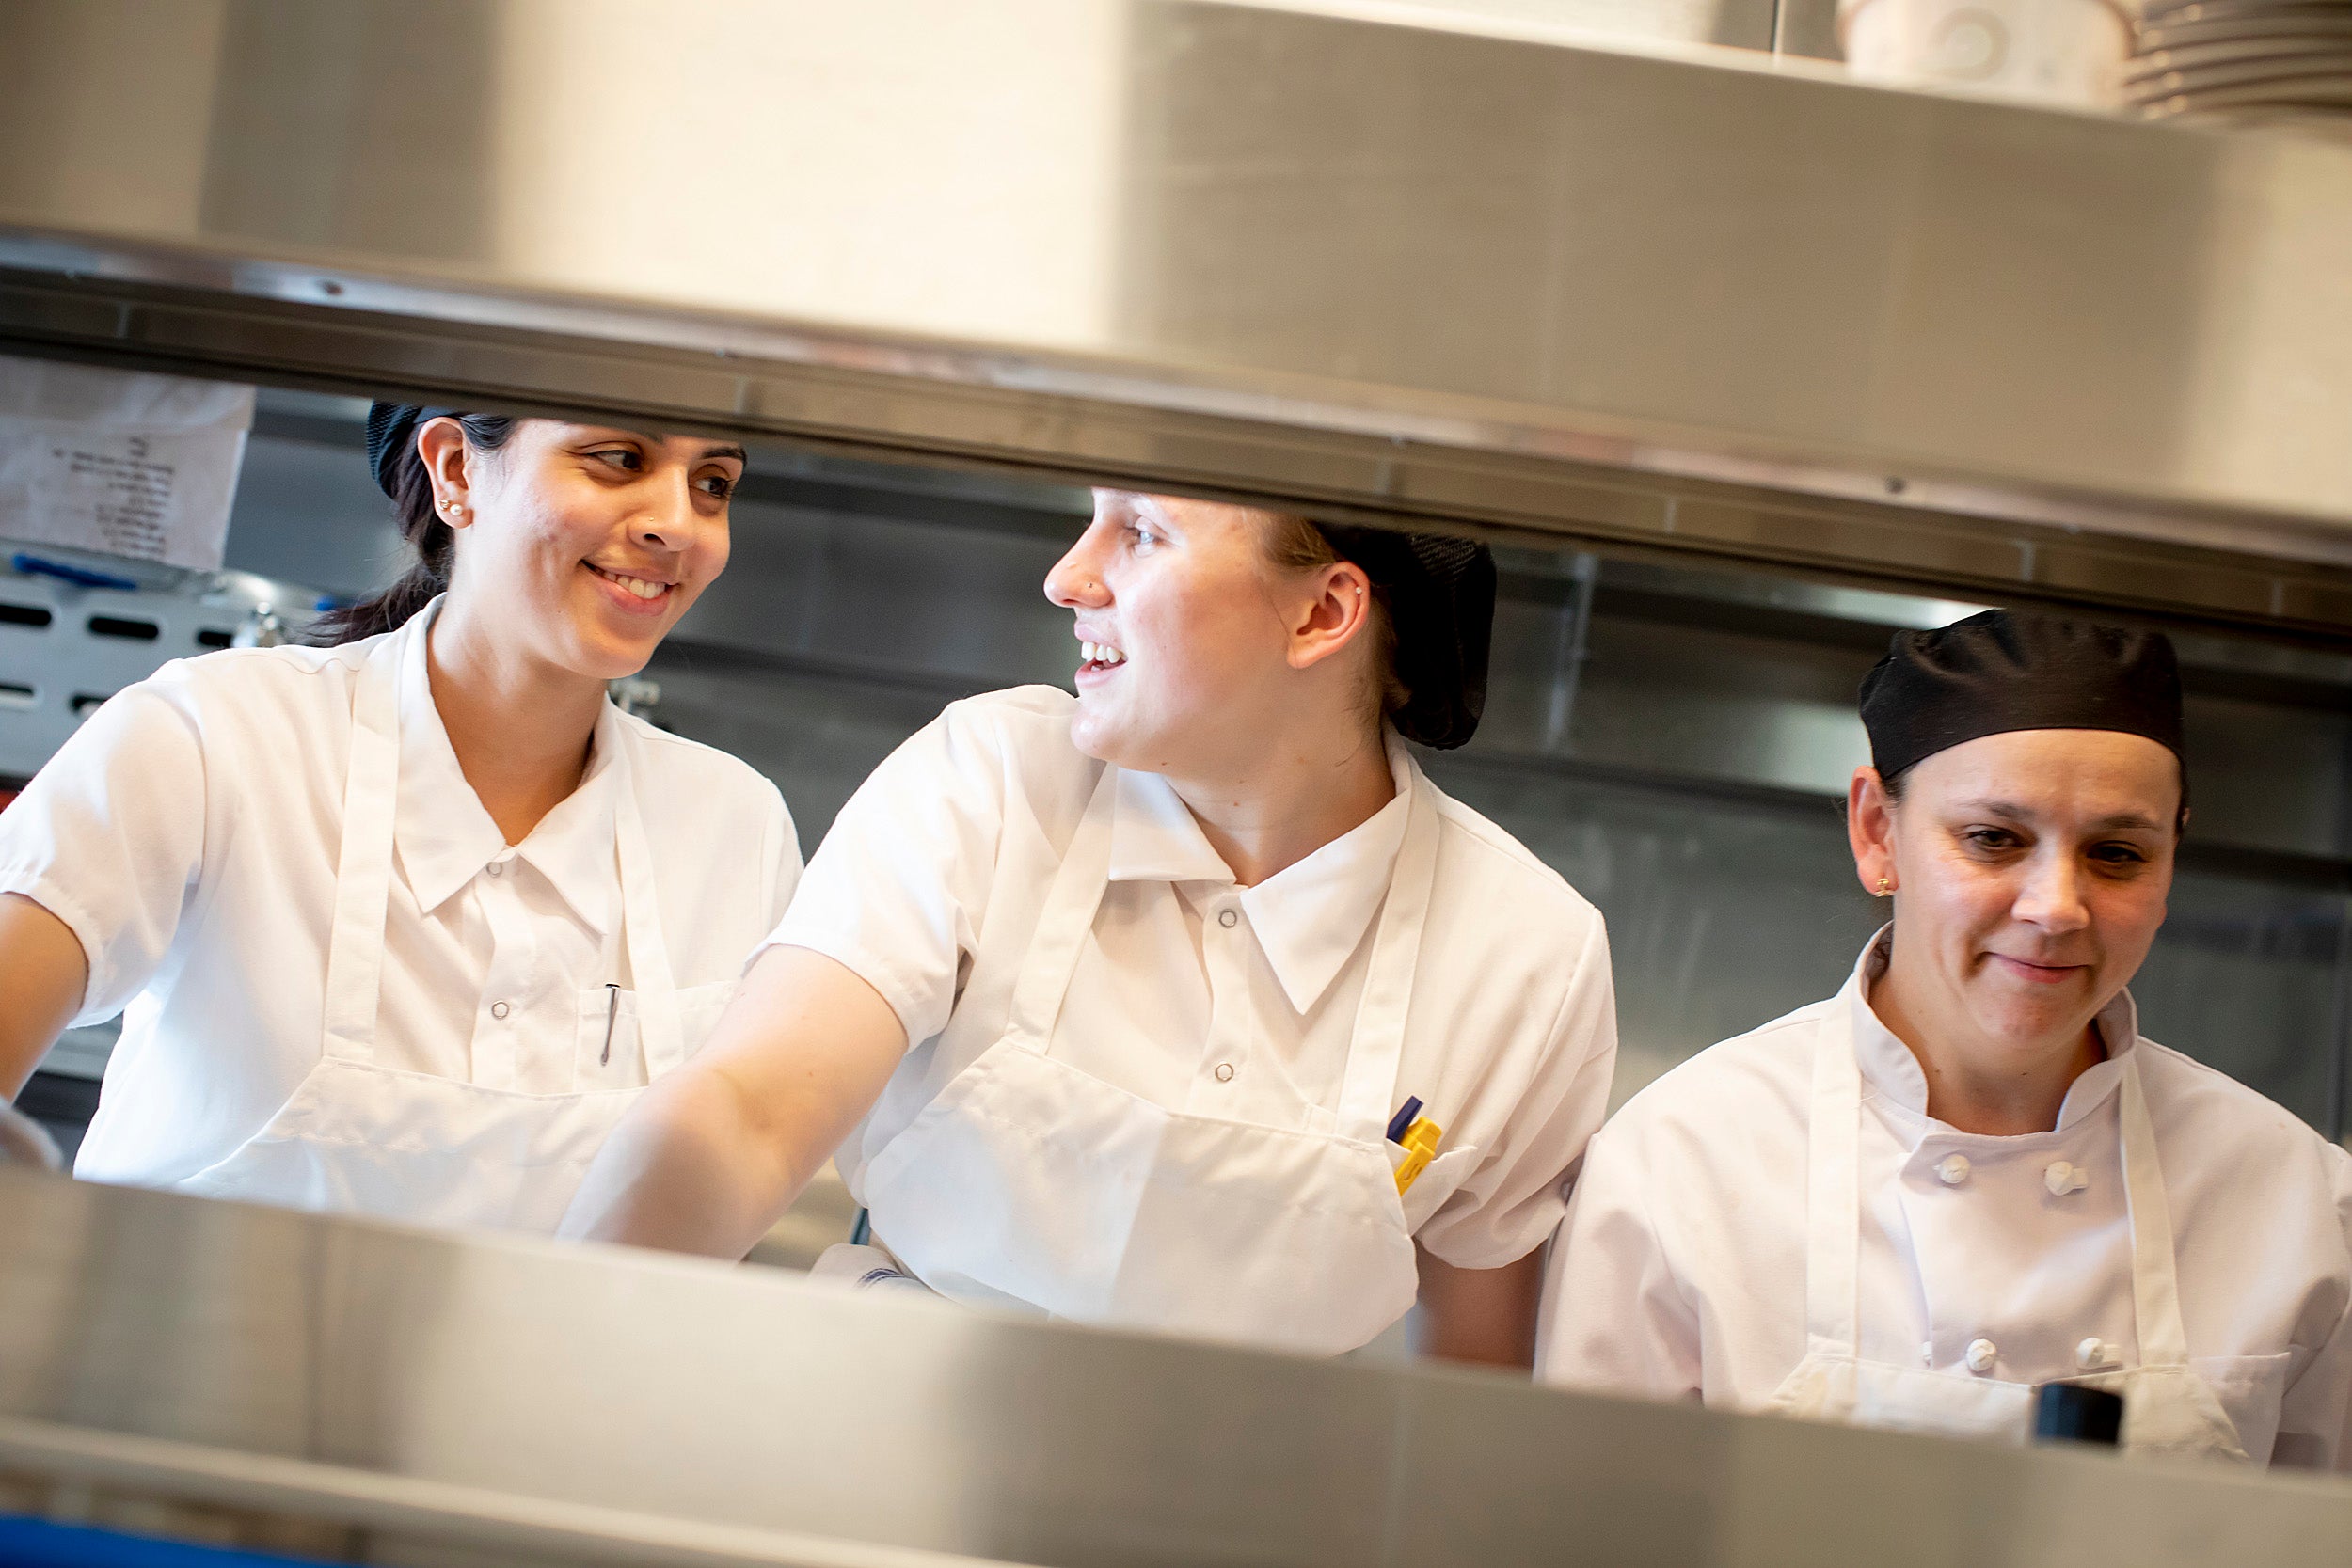 Chefs, Vanessa Portiza Acosta, from left, Corrine Gaucherin and Luz Restrepo Rincon work on the line in the kitchen at The Heights